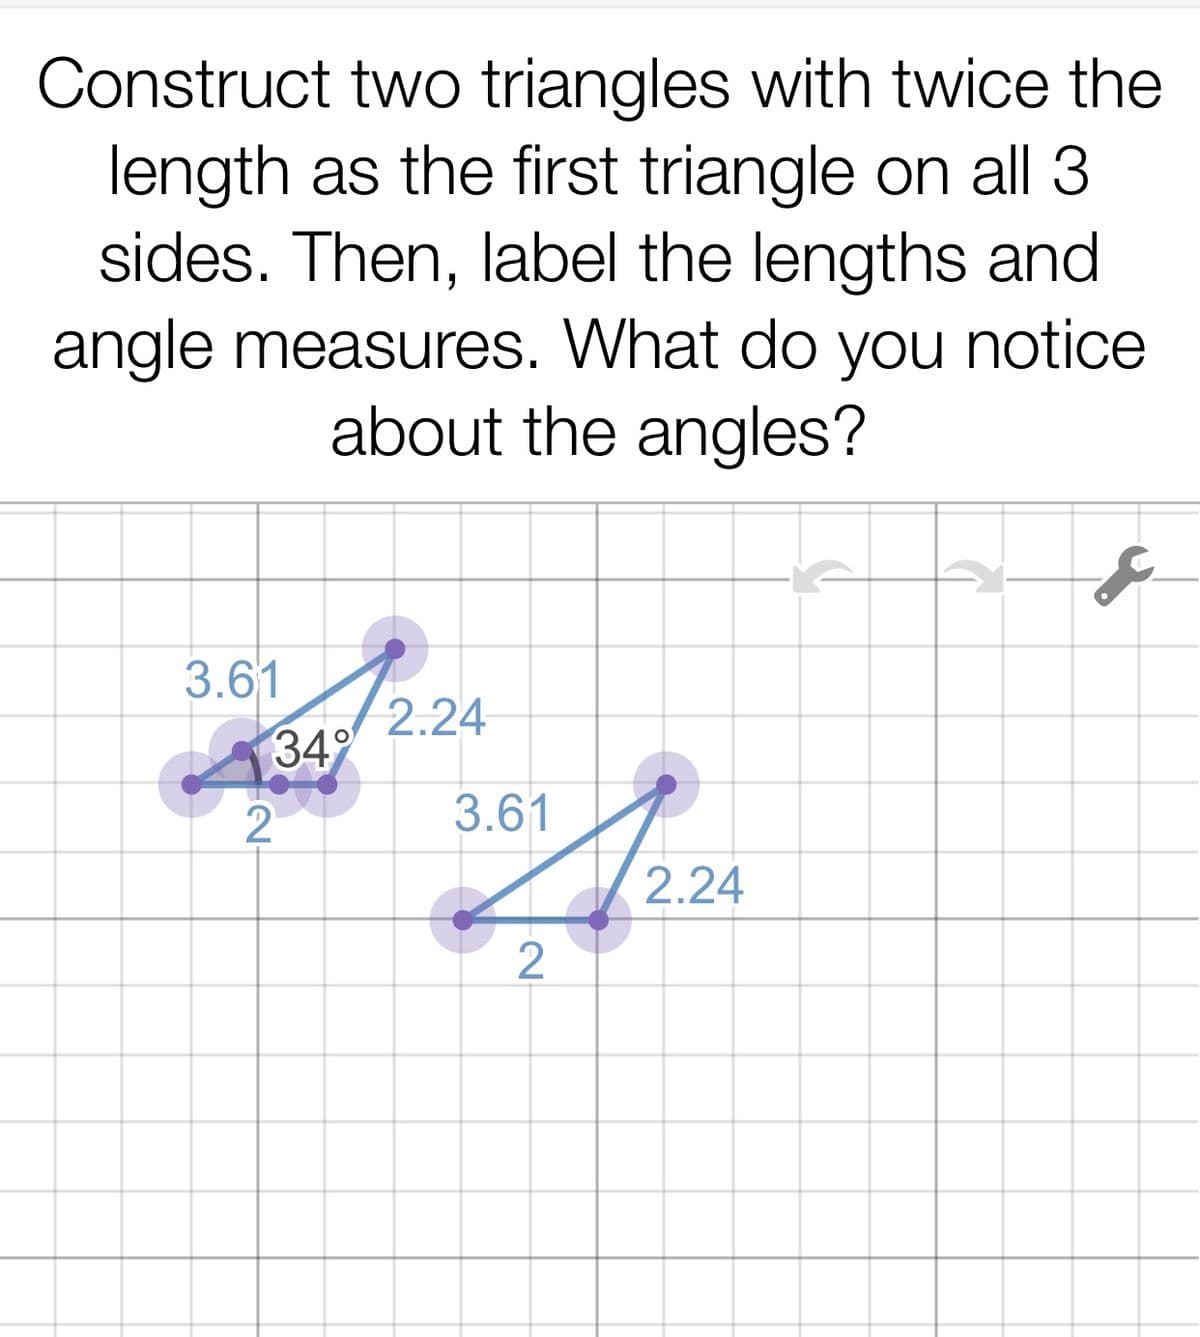 Construct two triangles with twice the
length as the first triangle on all 3
sides. Then, label the lengths and
angle measures. What do you notice
about the angles?
3.61
2.24
349
2
3.61
2.24
2
